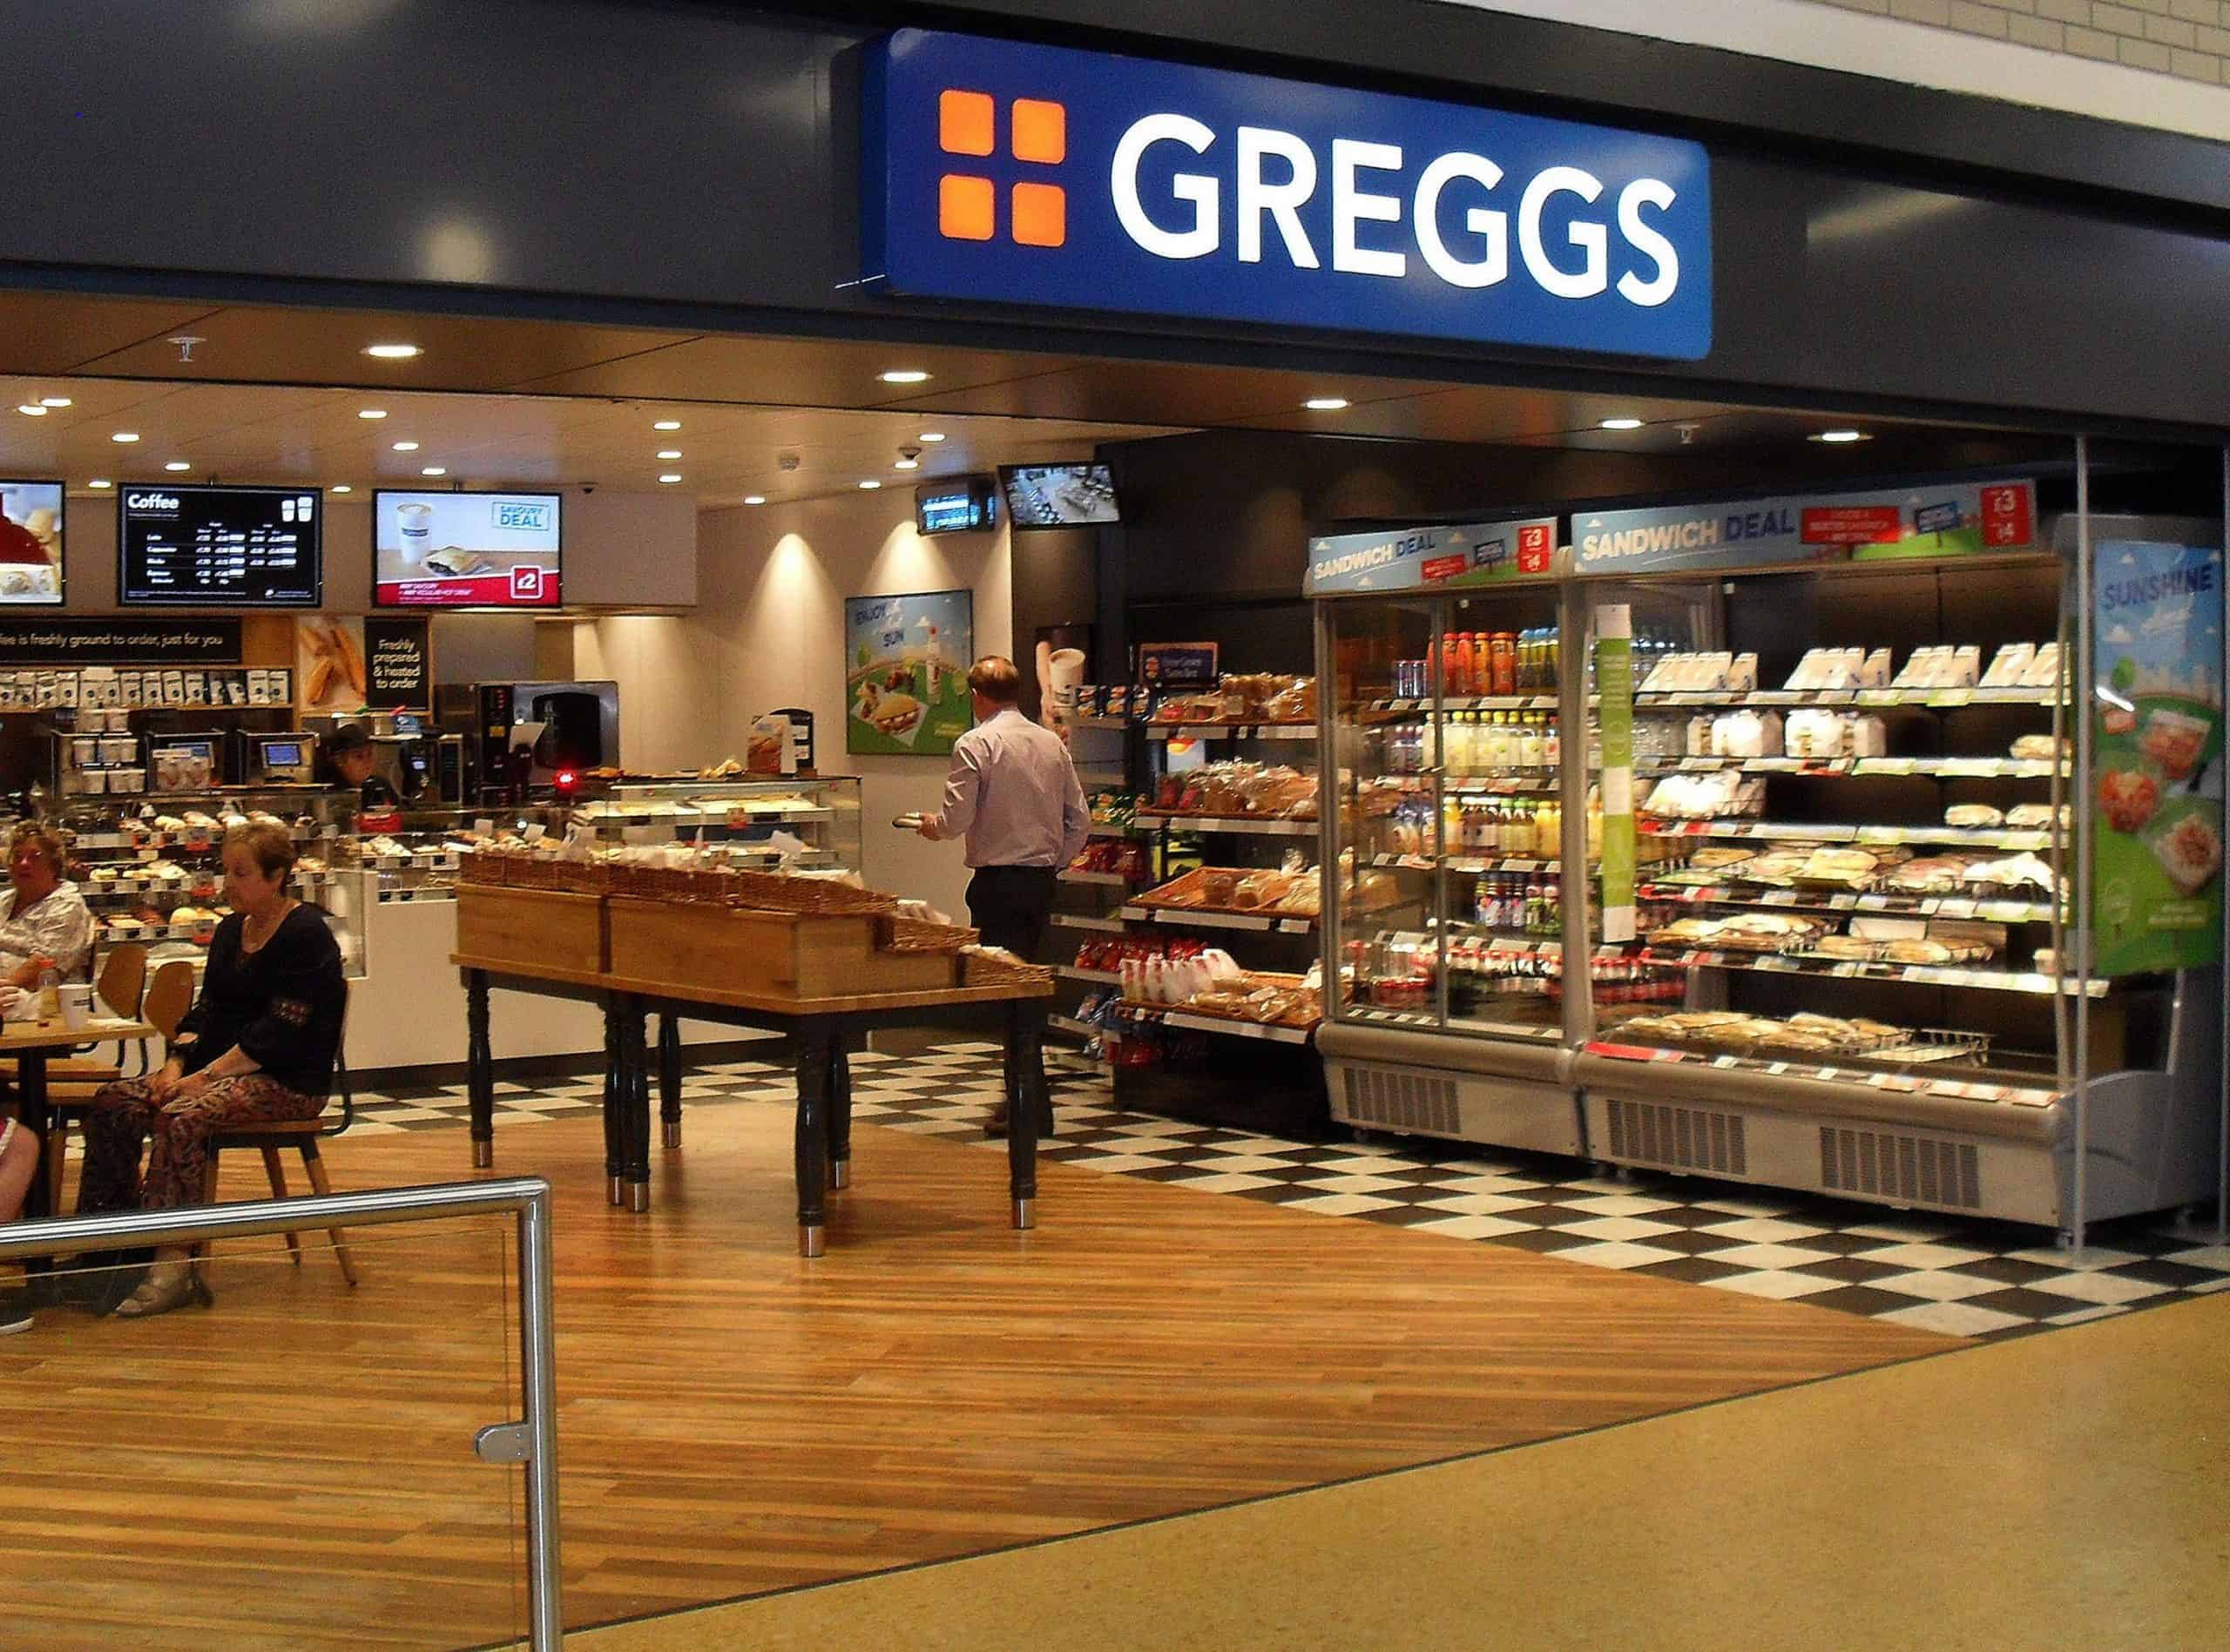 Pasties off the menu as Greggs becomes latest chain to be hit by supply chain issues